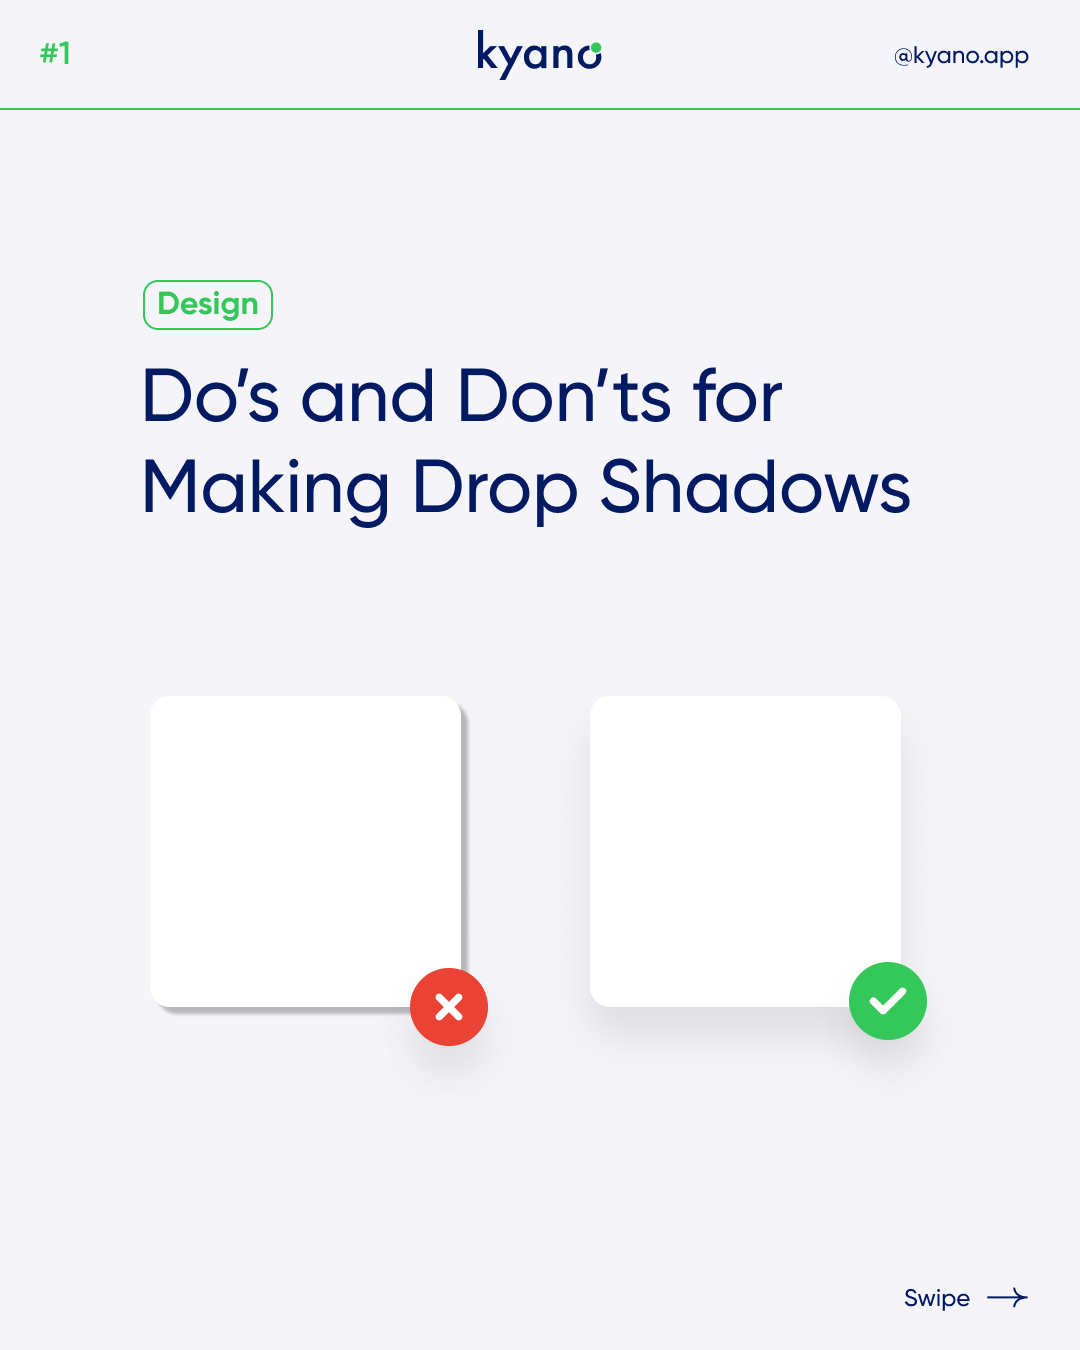 Do's and Don'ts for making Drop Shadows in Web Design